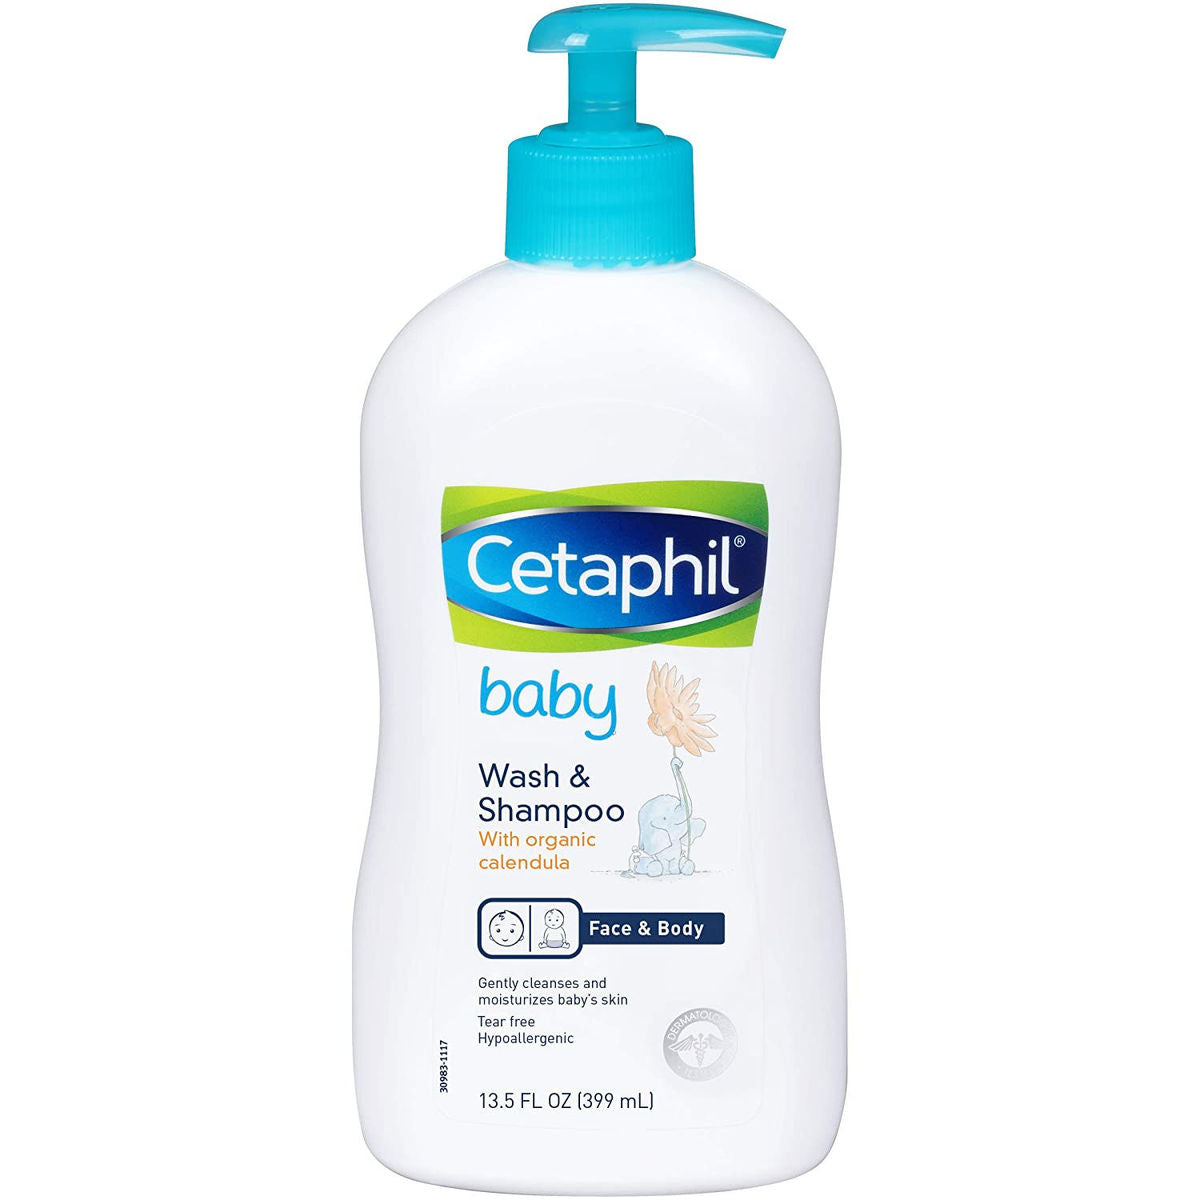 Cetaphil Baby Wash & Shampoo with Organic Calendula for Face & Body (399 ml) Cetaphil Baby